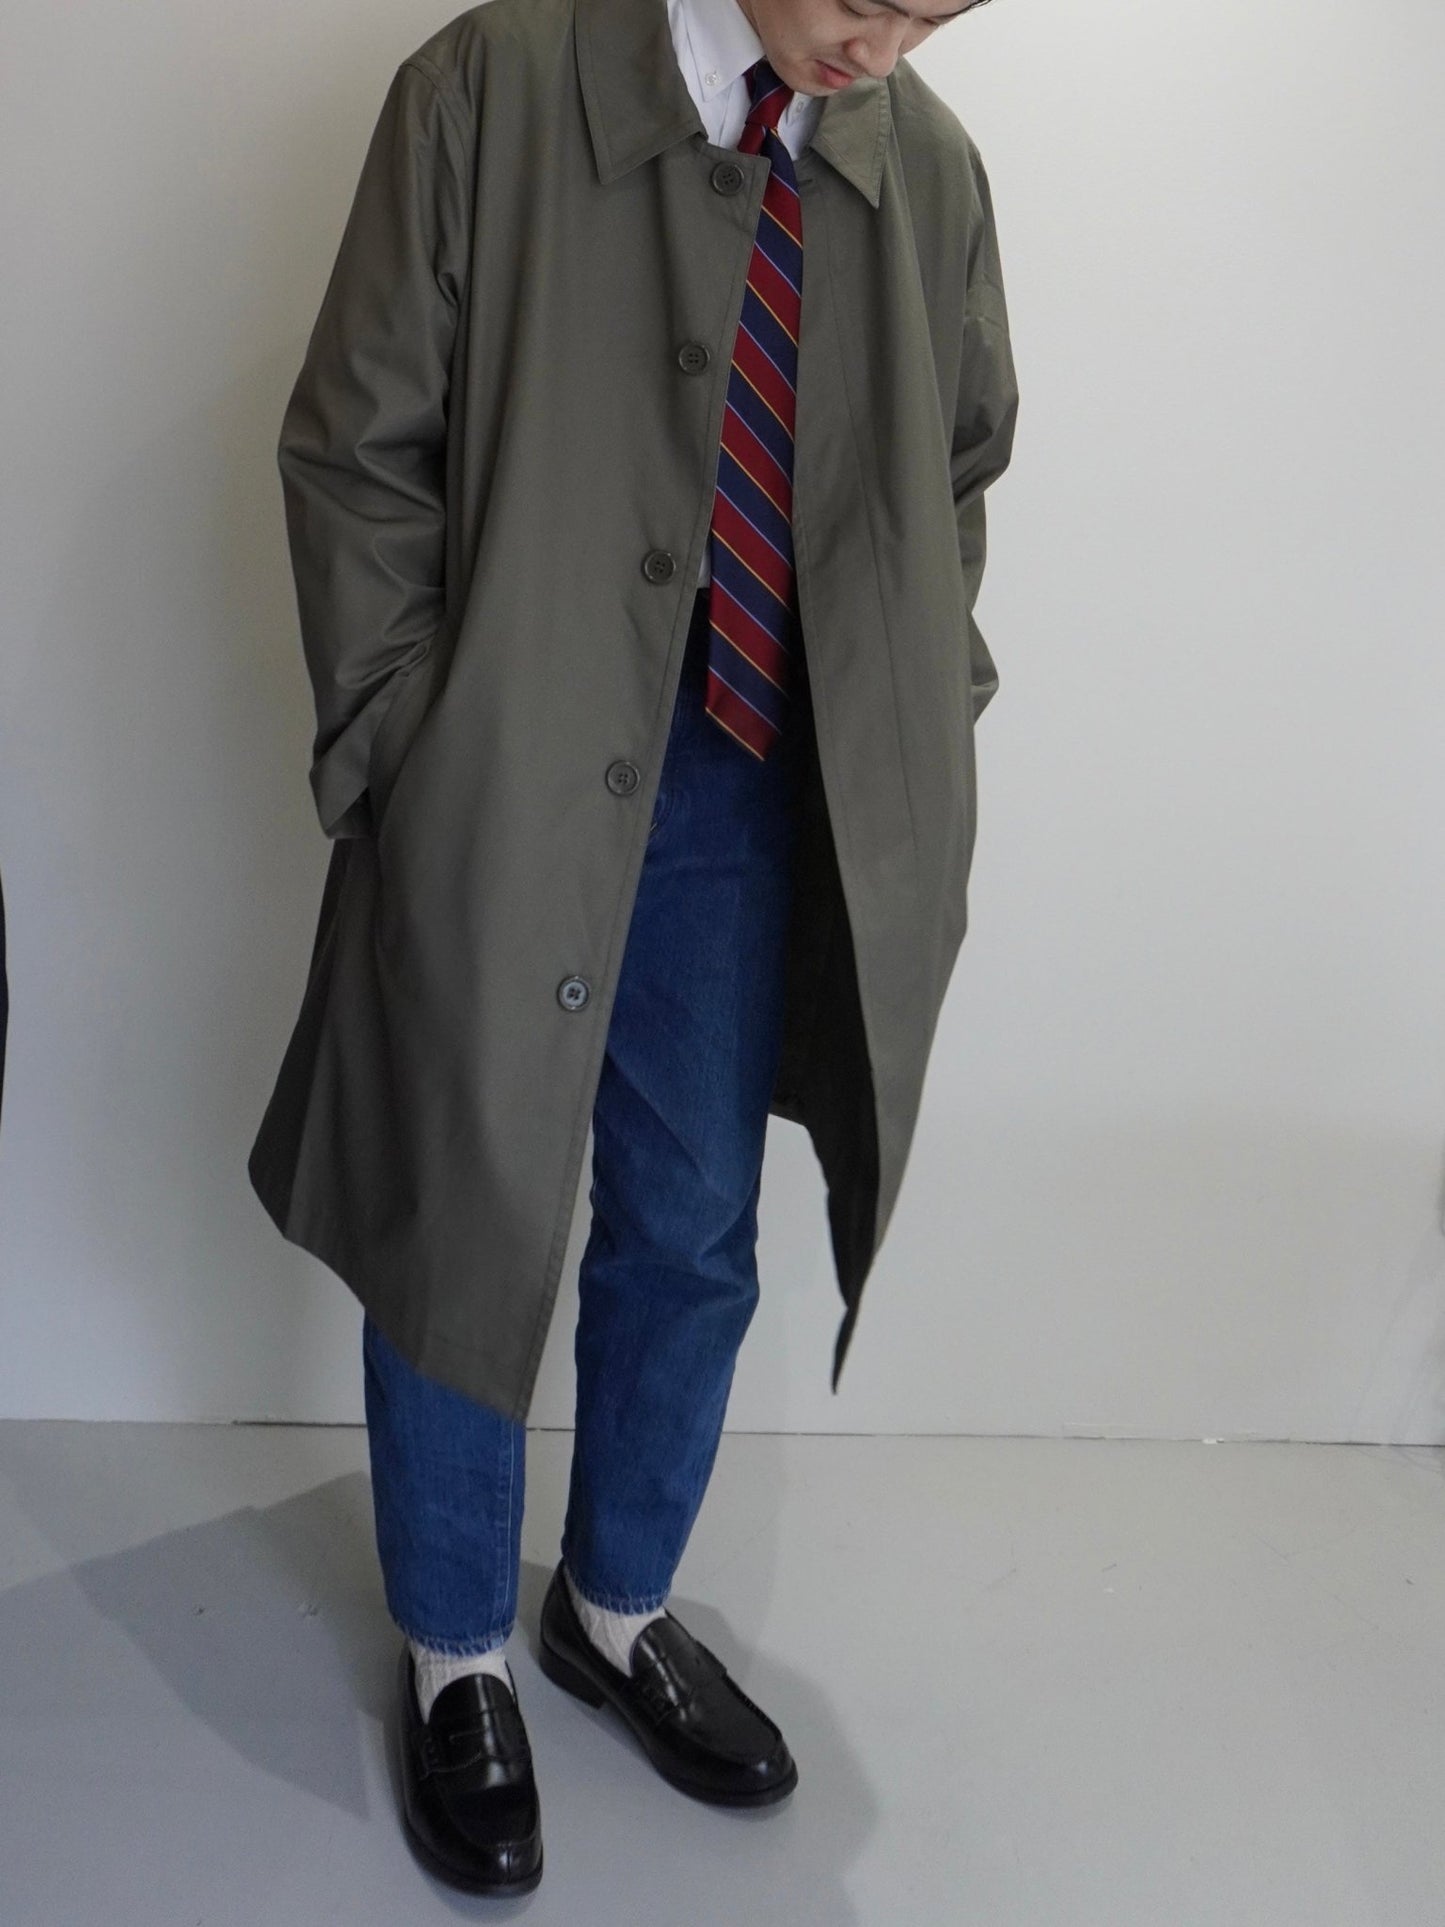 [FRENCH ARMY] OLD OFFICER COAT コート - #shop_name #アパルティール# #名古屋# #セレクトショップ#